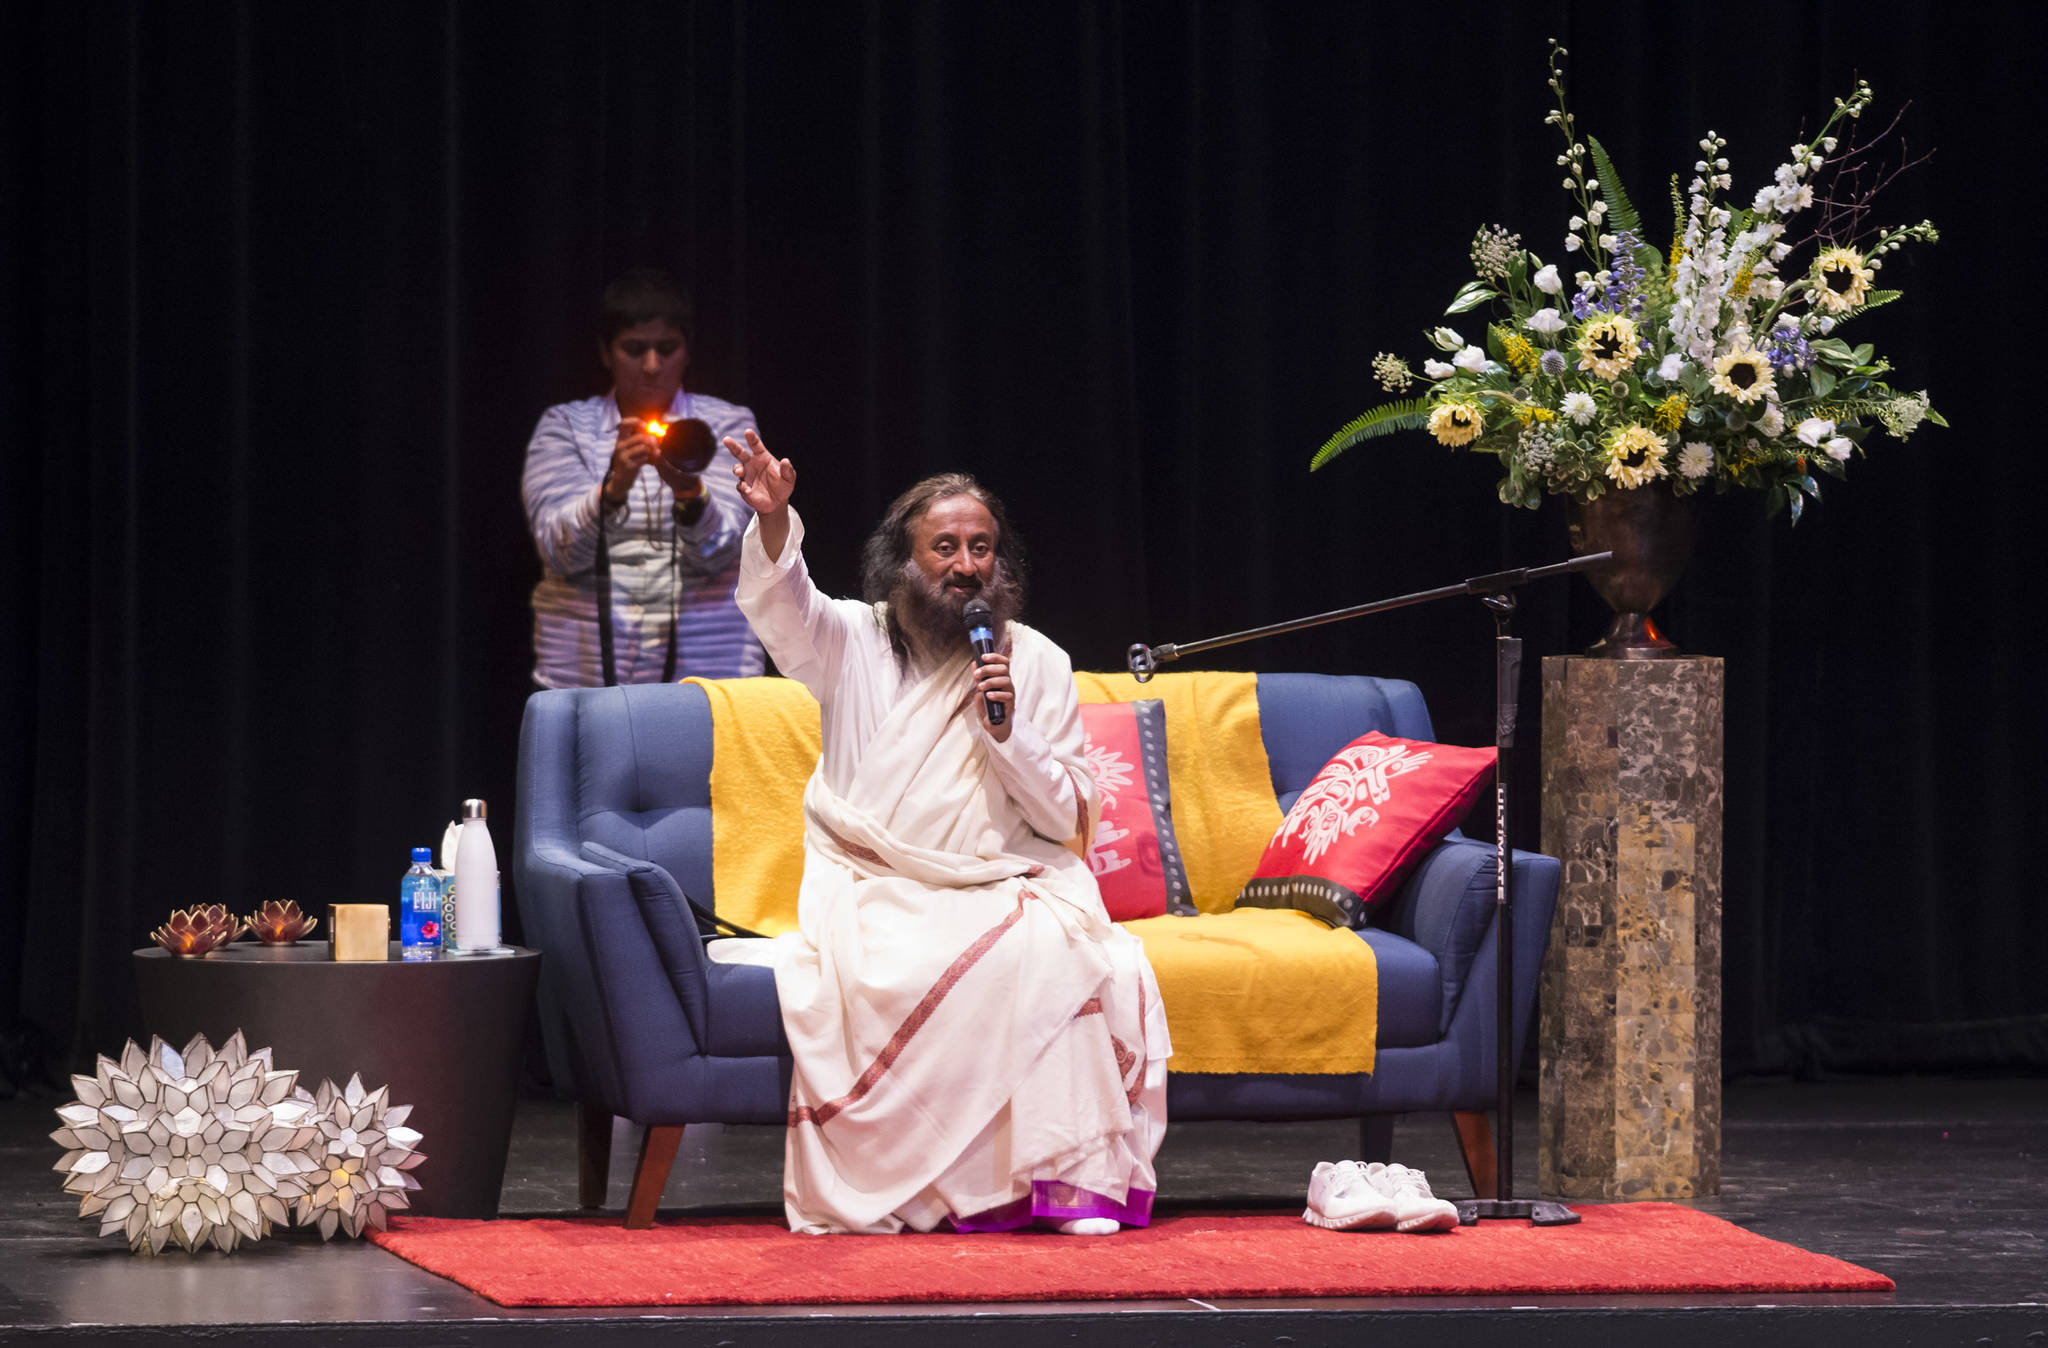 Spiritual leader Sri Sri Ravi Shankar of The Art of Living Foundation leads a group meditation at the Juneau-Douglas High School auditorium on Tuesday, July 31, 2018, as part of his West Coast Tour that also includes San Francisco and Seattle. (Michael Penn | Juneau Empire)